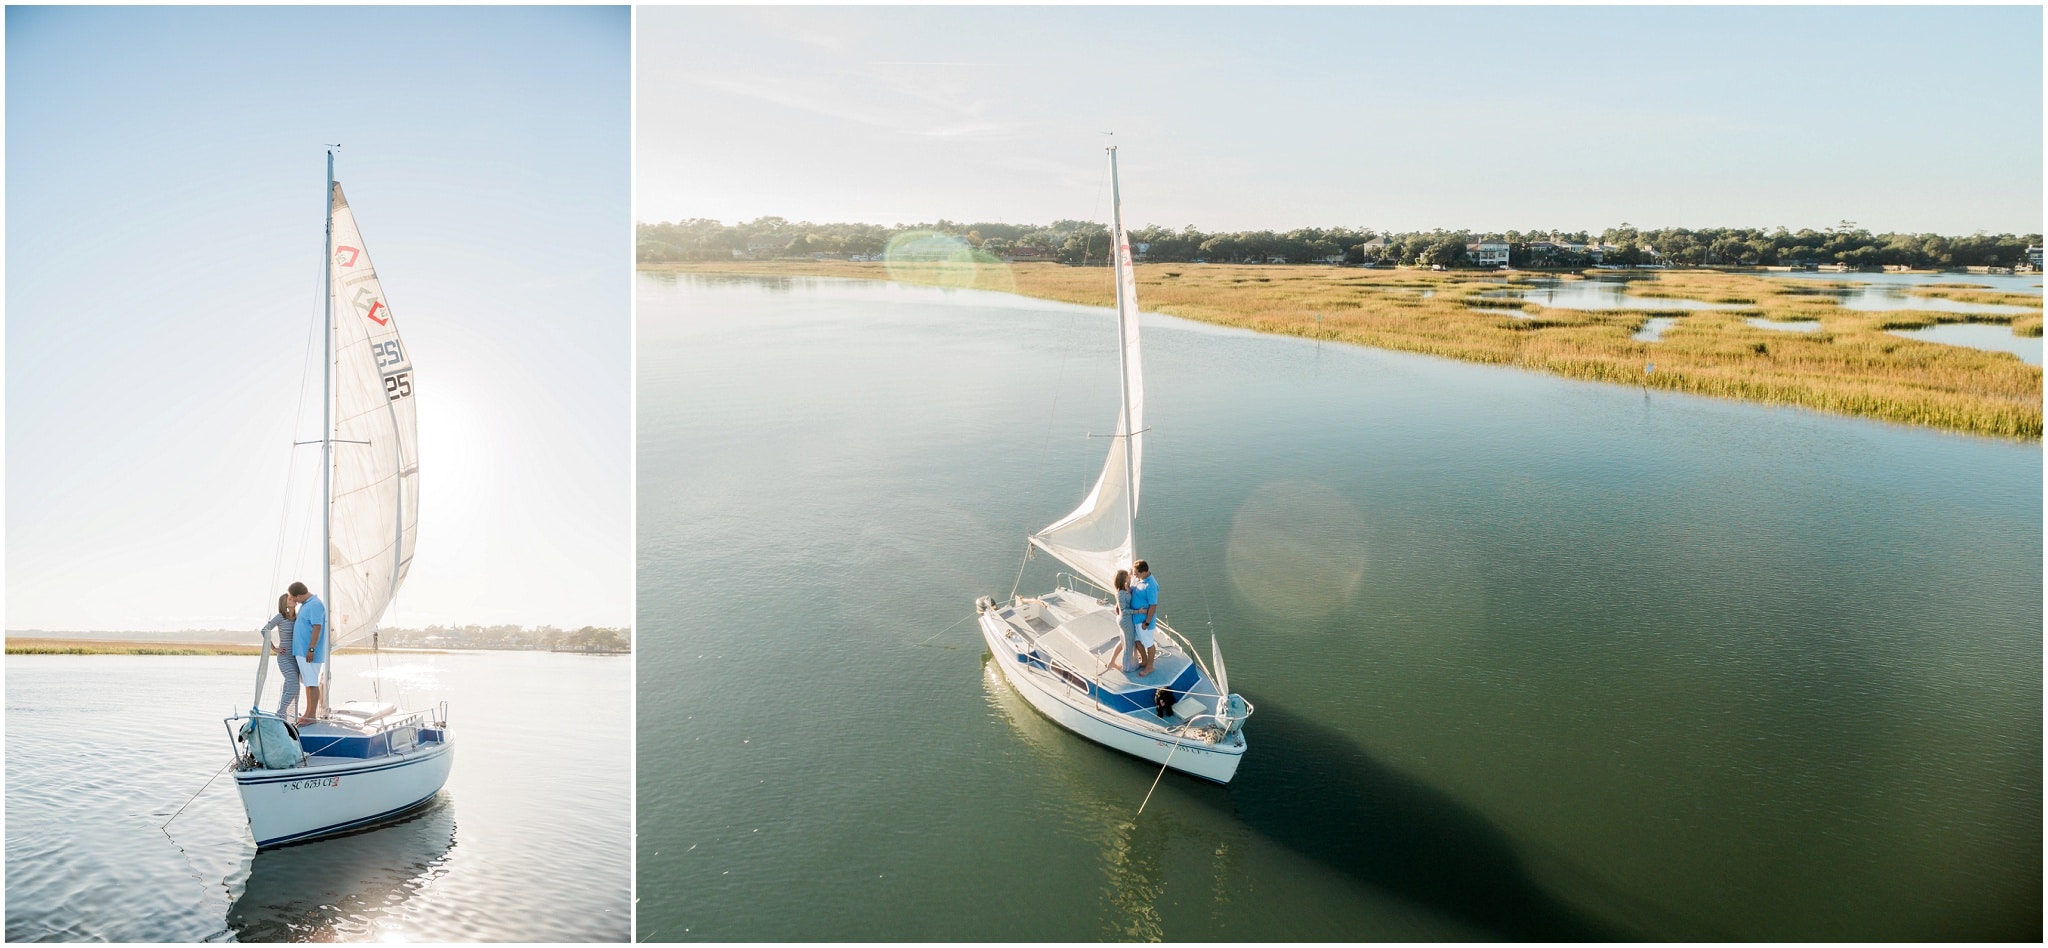 Engagement session on a sailboat by the best Myrtle Beach photographer, Dana and Bradley anchored in the creek, Sailing, Myrtle Beach Engagement Photography Session 13, Murrells Inlet, South Carolina, www.onelifephoto.net Photography